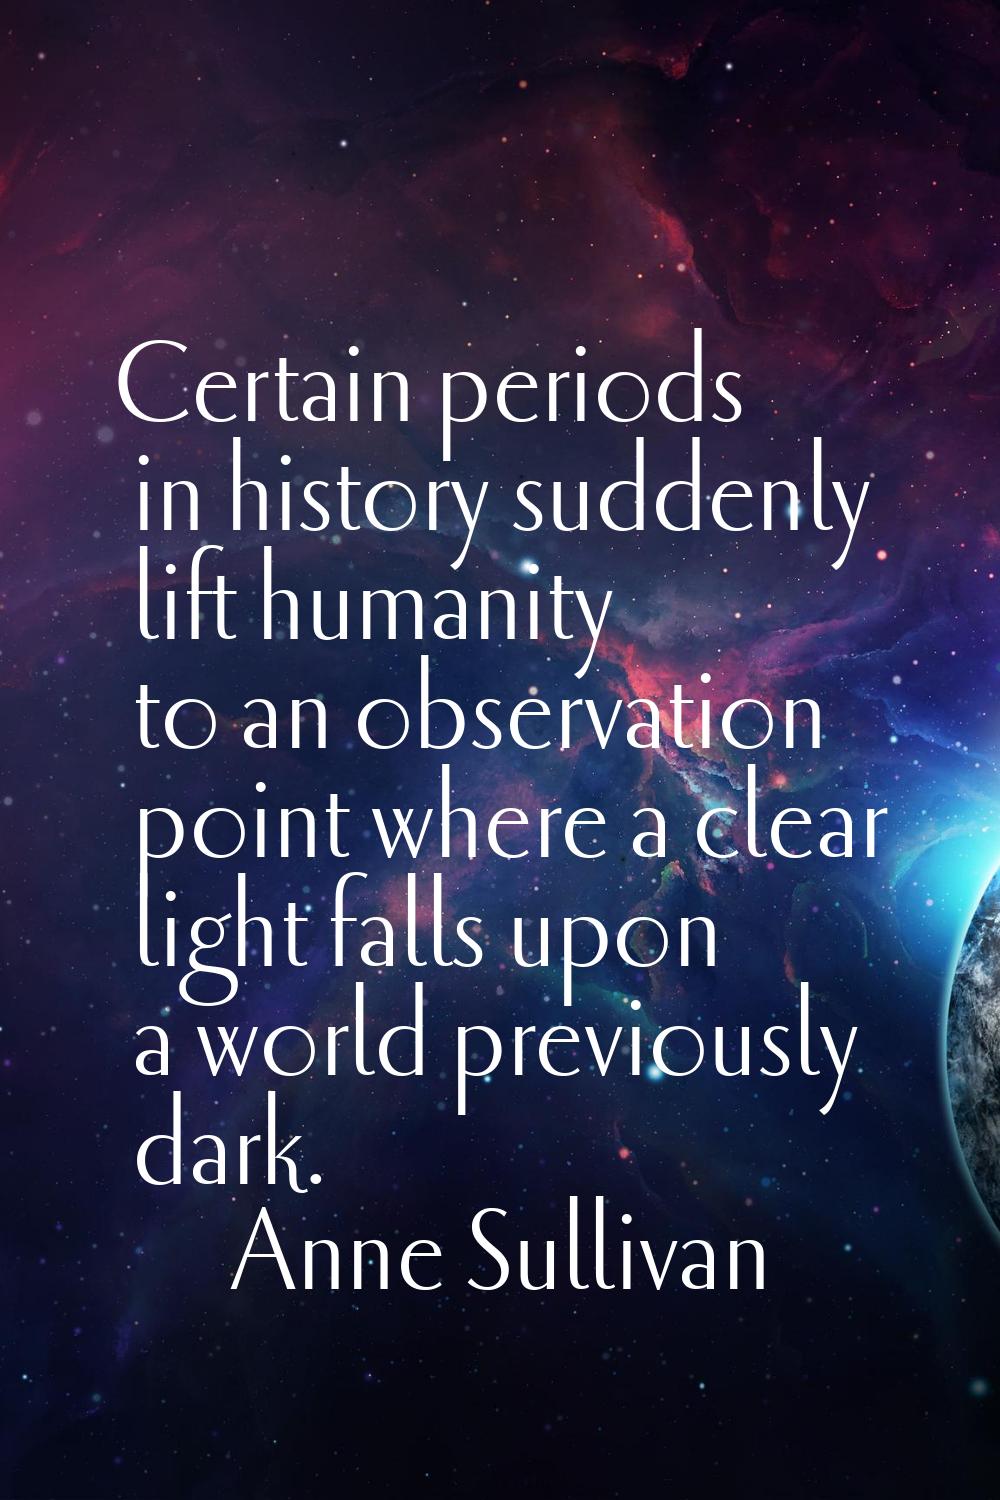 Certain periods in history suddenly lift humanity to an observation point where a clear light falls